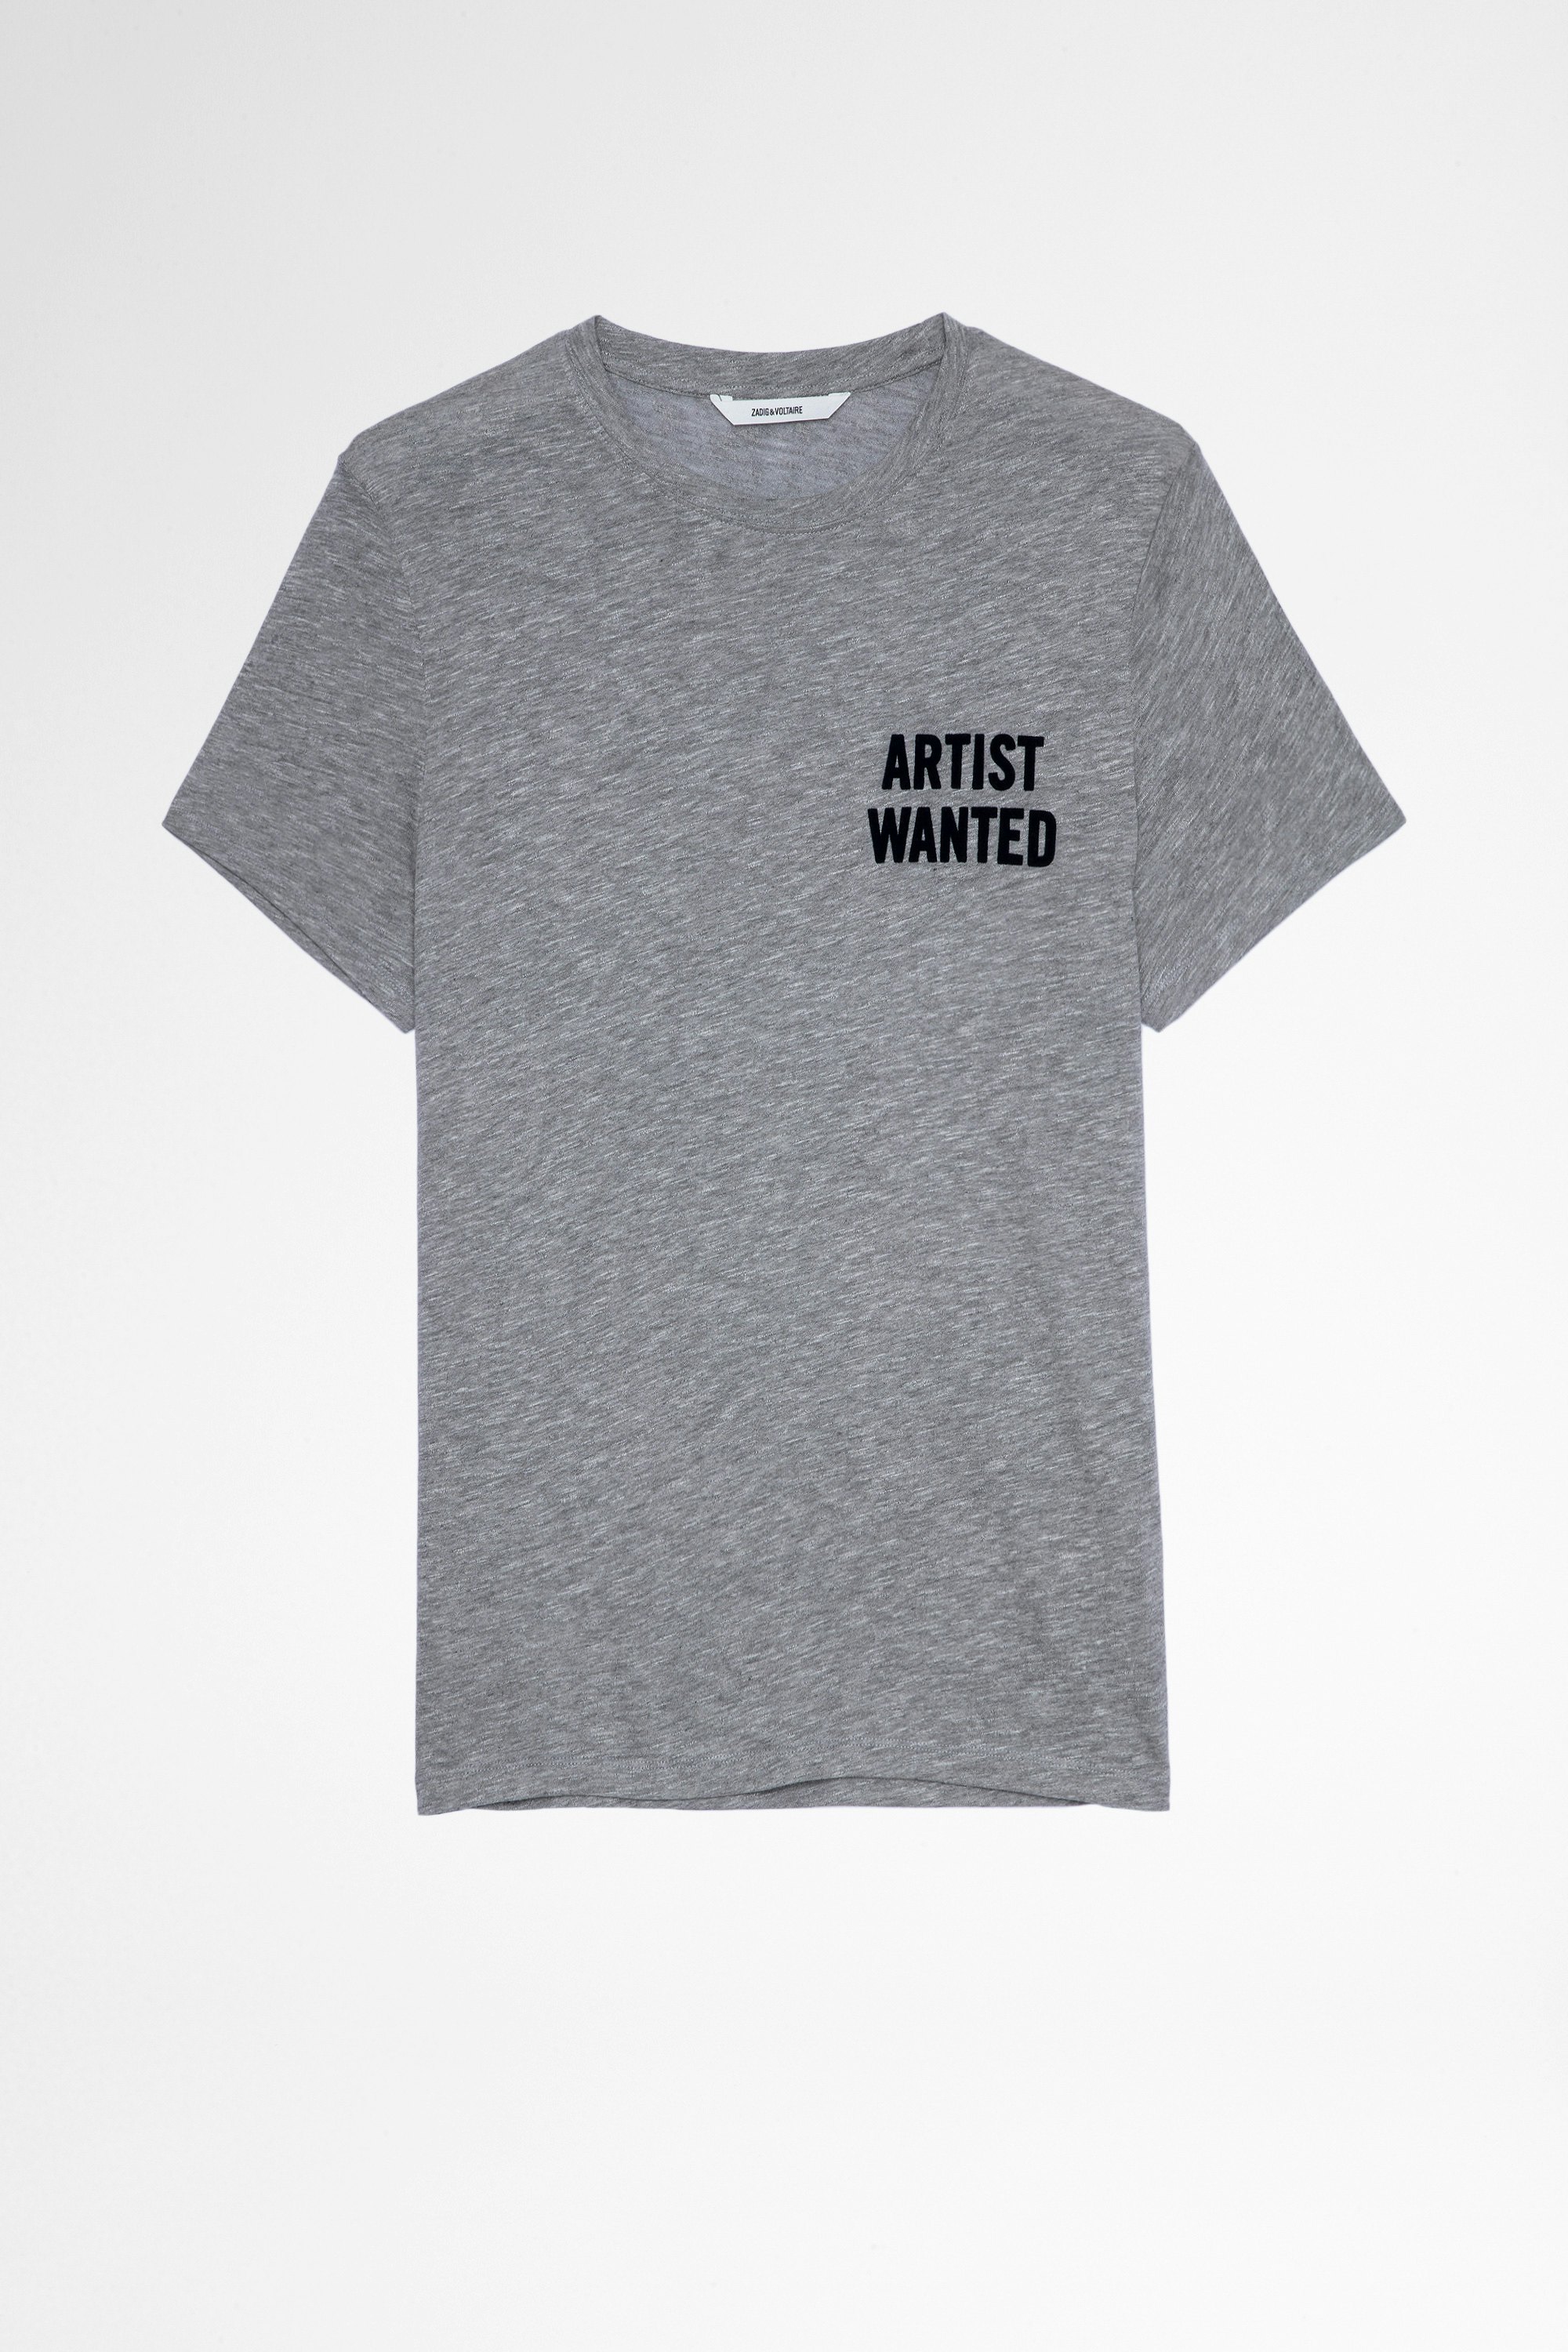 Tommy T-Shirt Men's gray Artist Wanted t-shirt in cotton and viscose